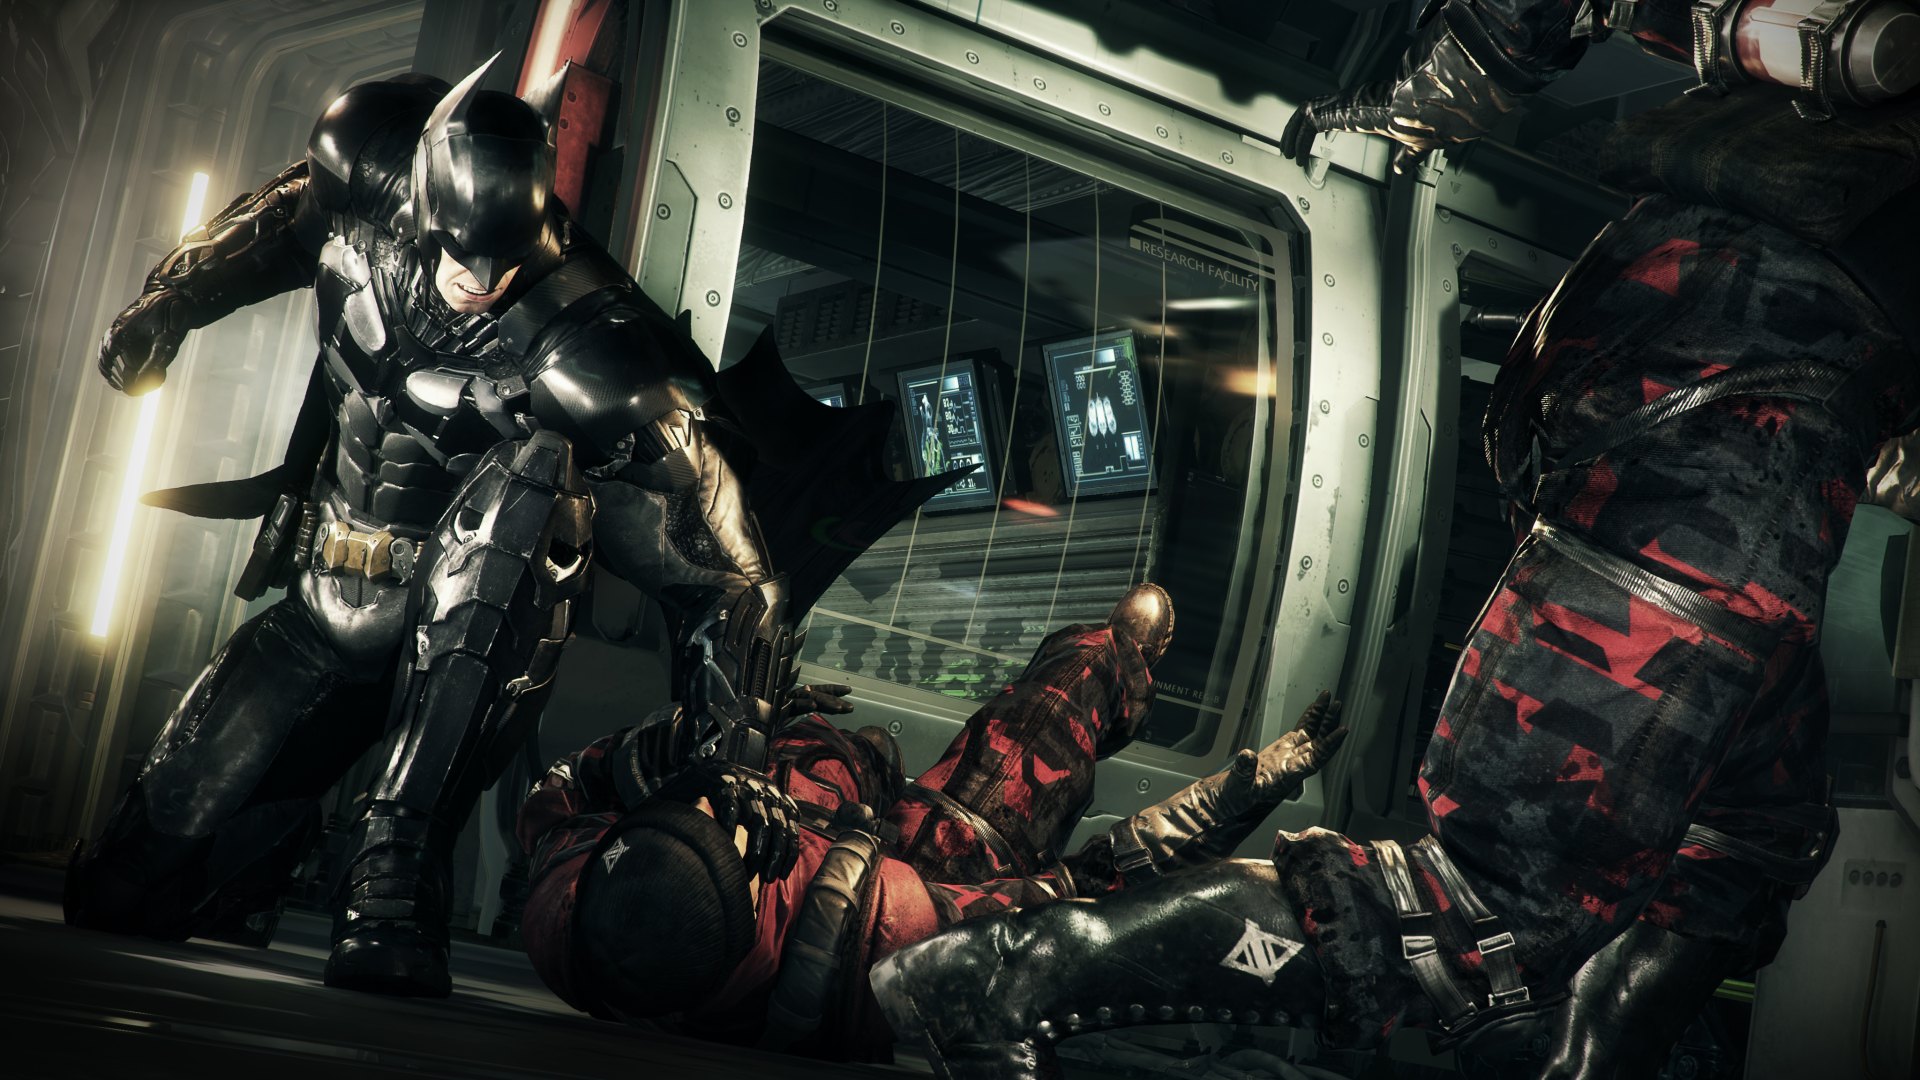 stempel diamant Mob Batman: Arkham Knight PC Users Bomb Steam Reviews, Metacritic Due to Issues  - Update